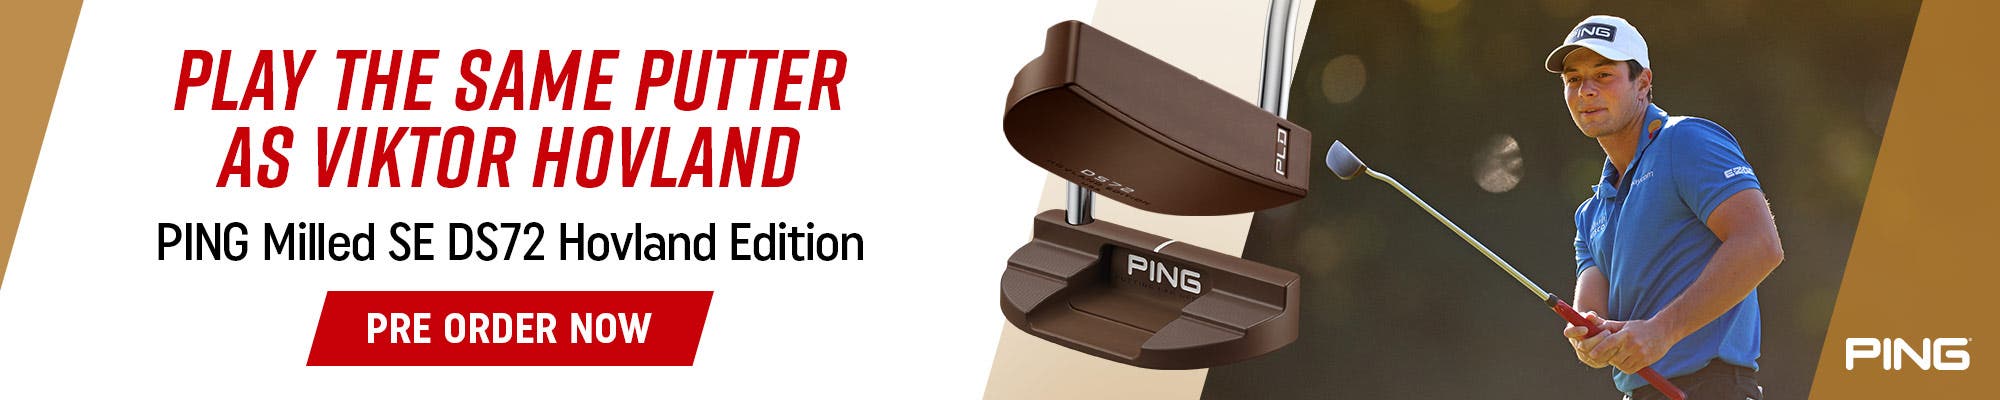 play the same putter as viktor hovland | preorder now